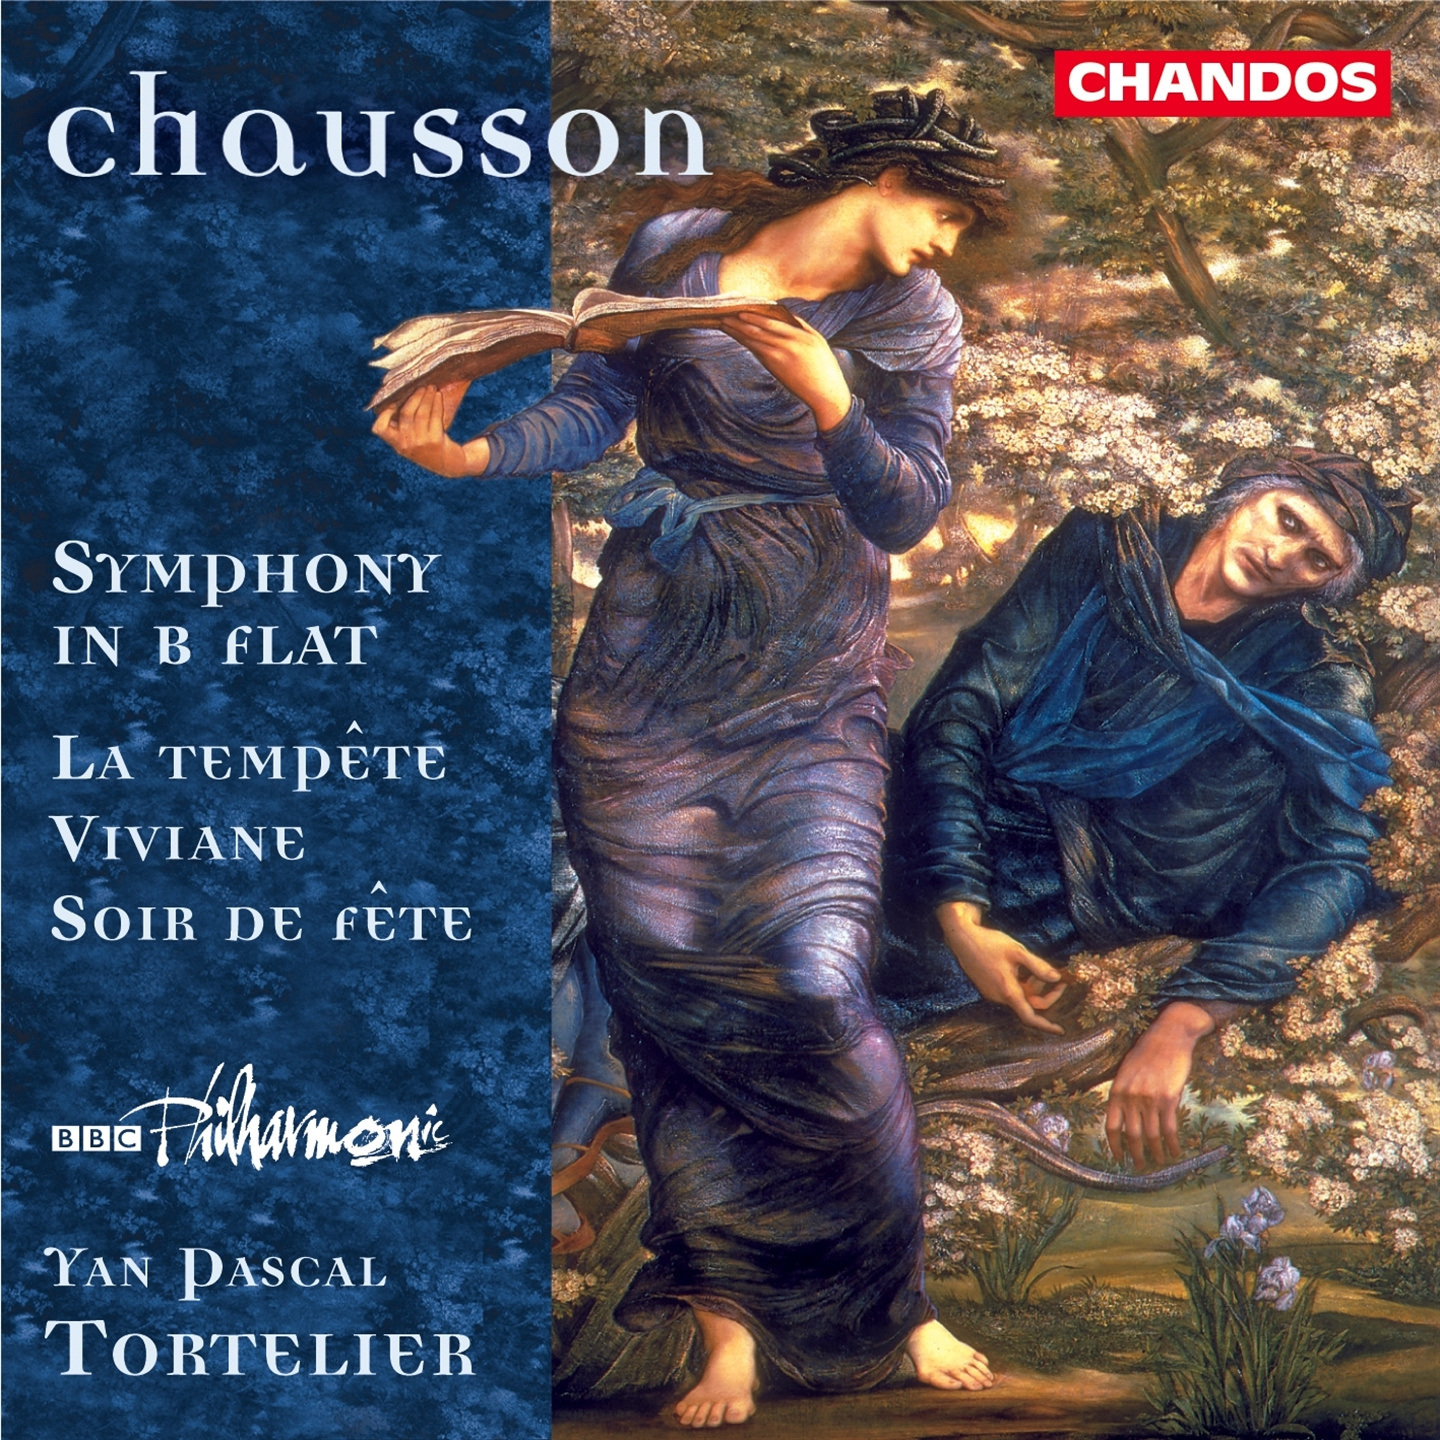 CHAUSSON: SYMPHONY IN B FLAT